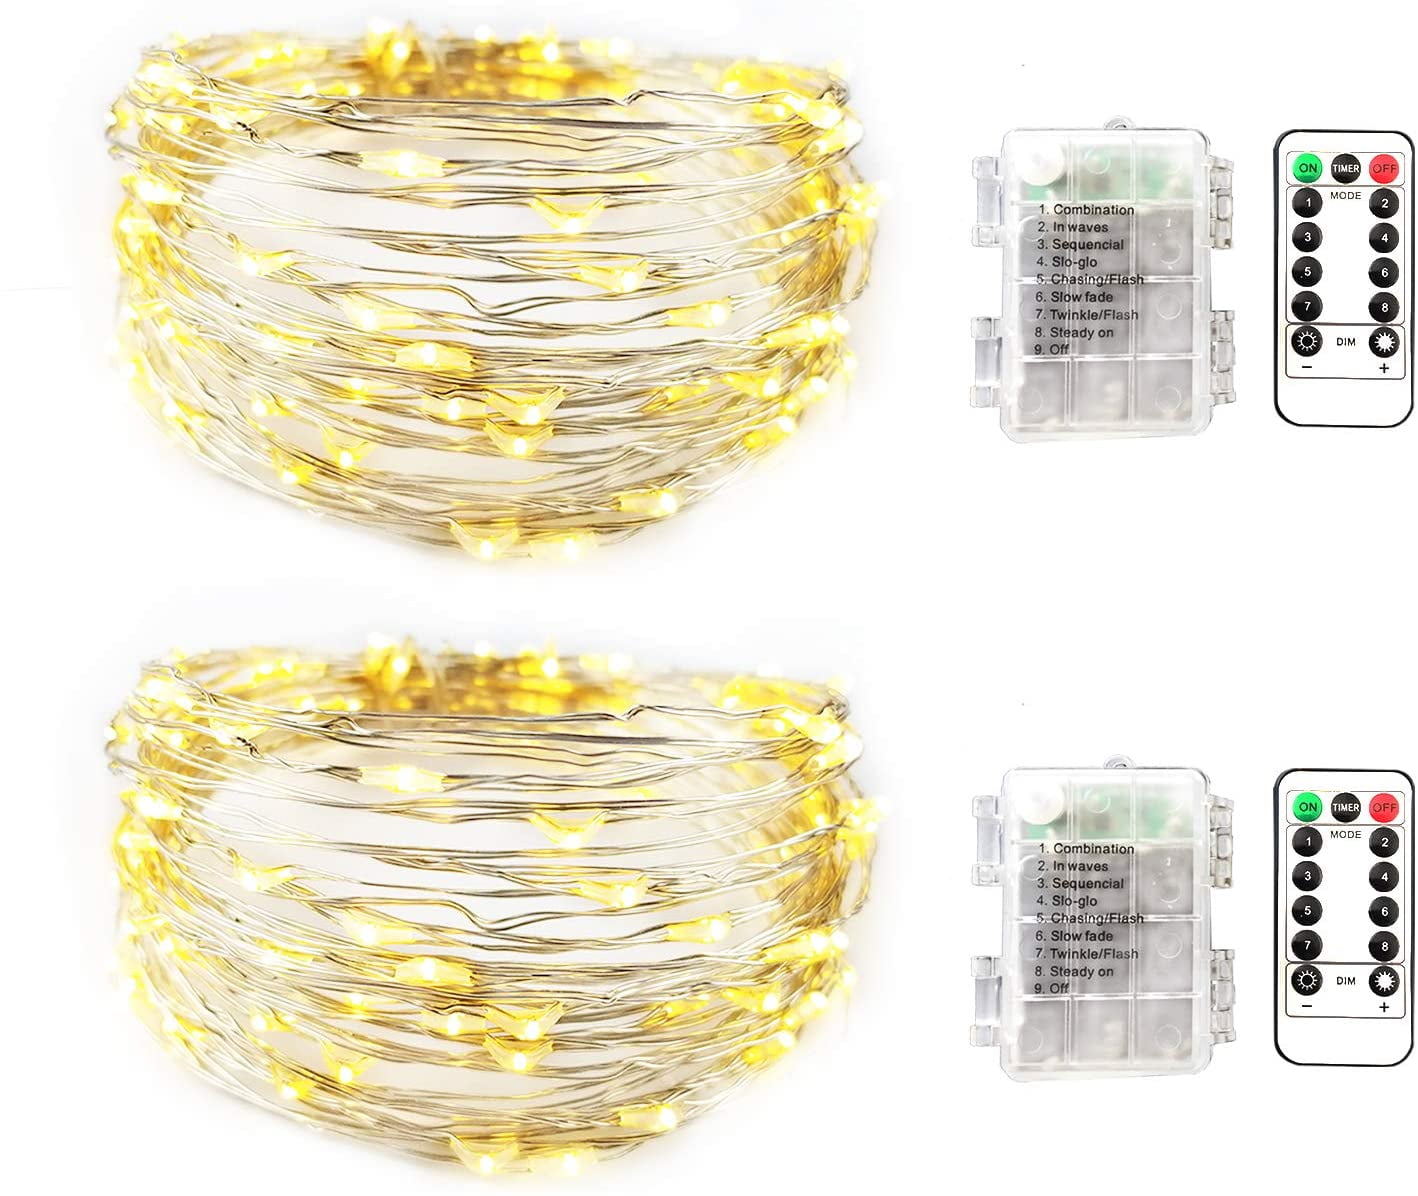 2 Set Fairy Light Battery Operated 16.4ft 50Leds String Light with Remote Timer 